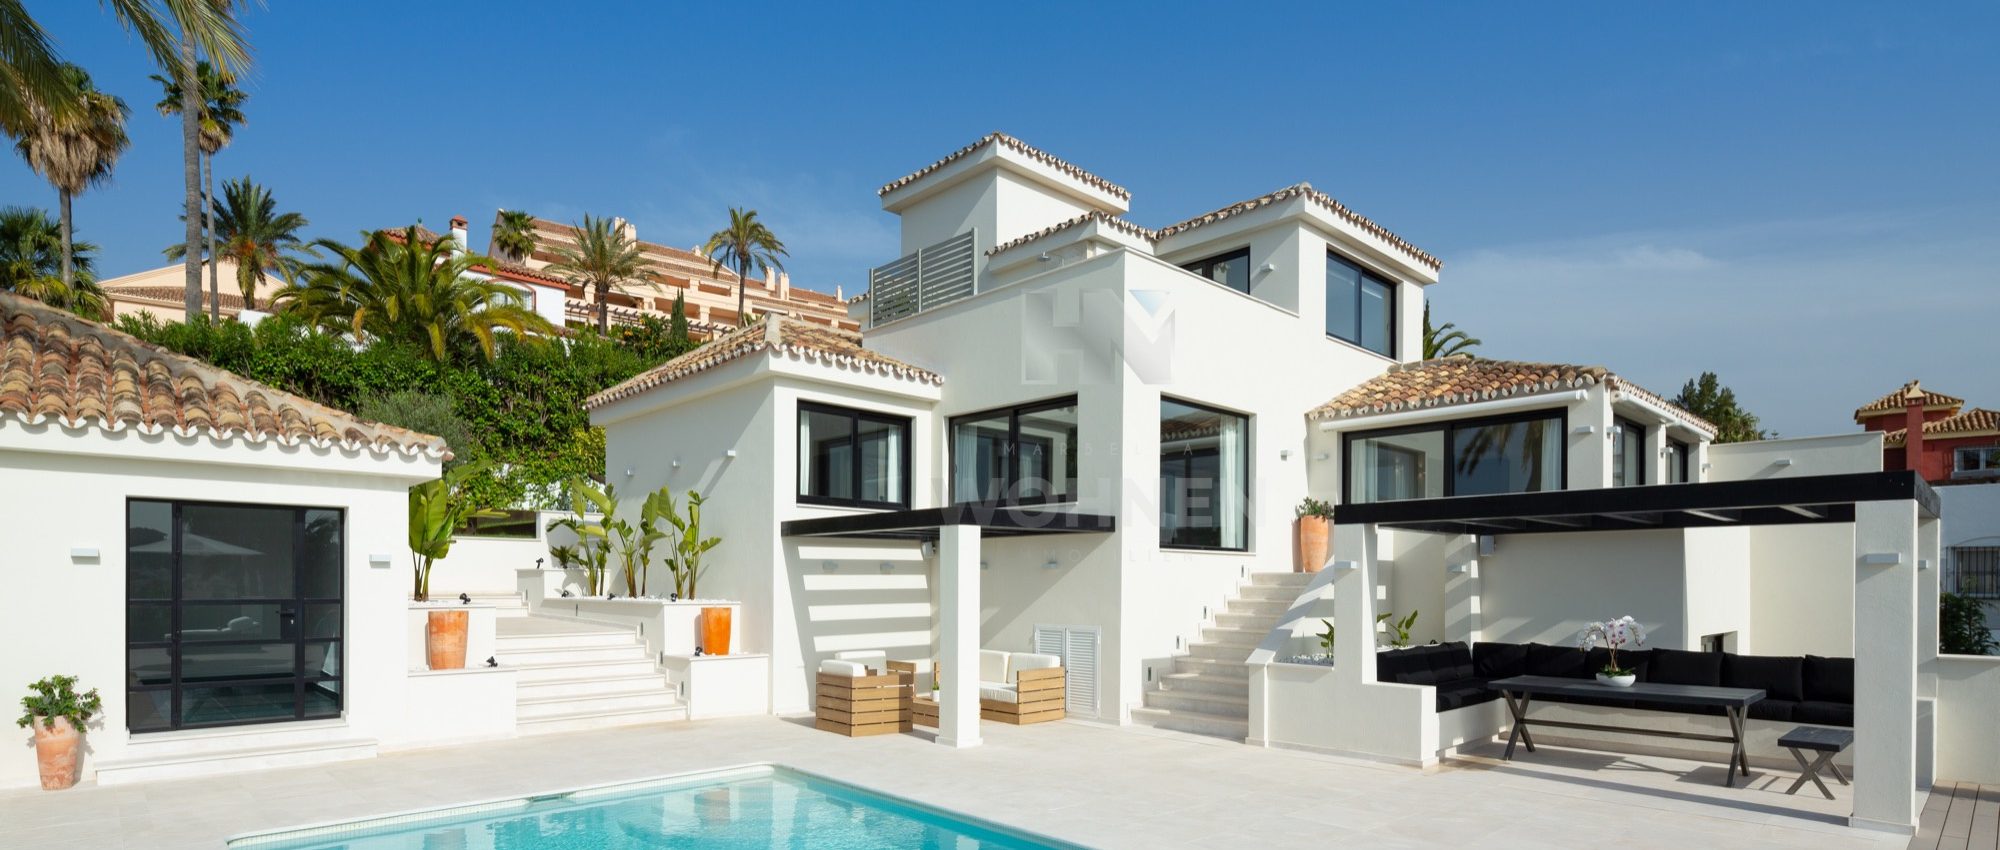 Completely renovated villa in Los Naranjos Hill Club with breathtaking views of the sea